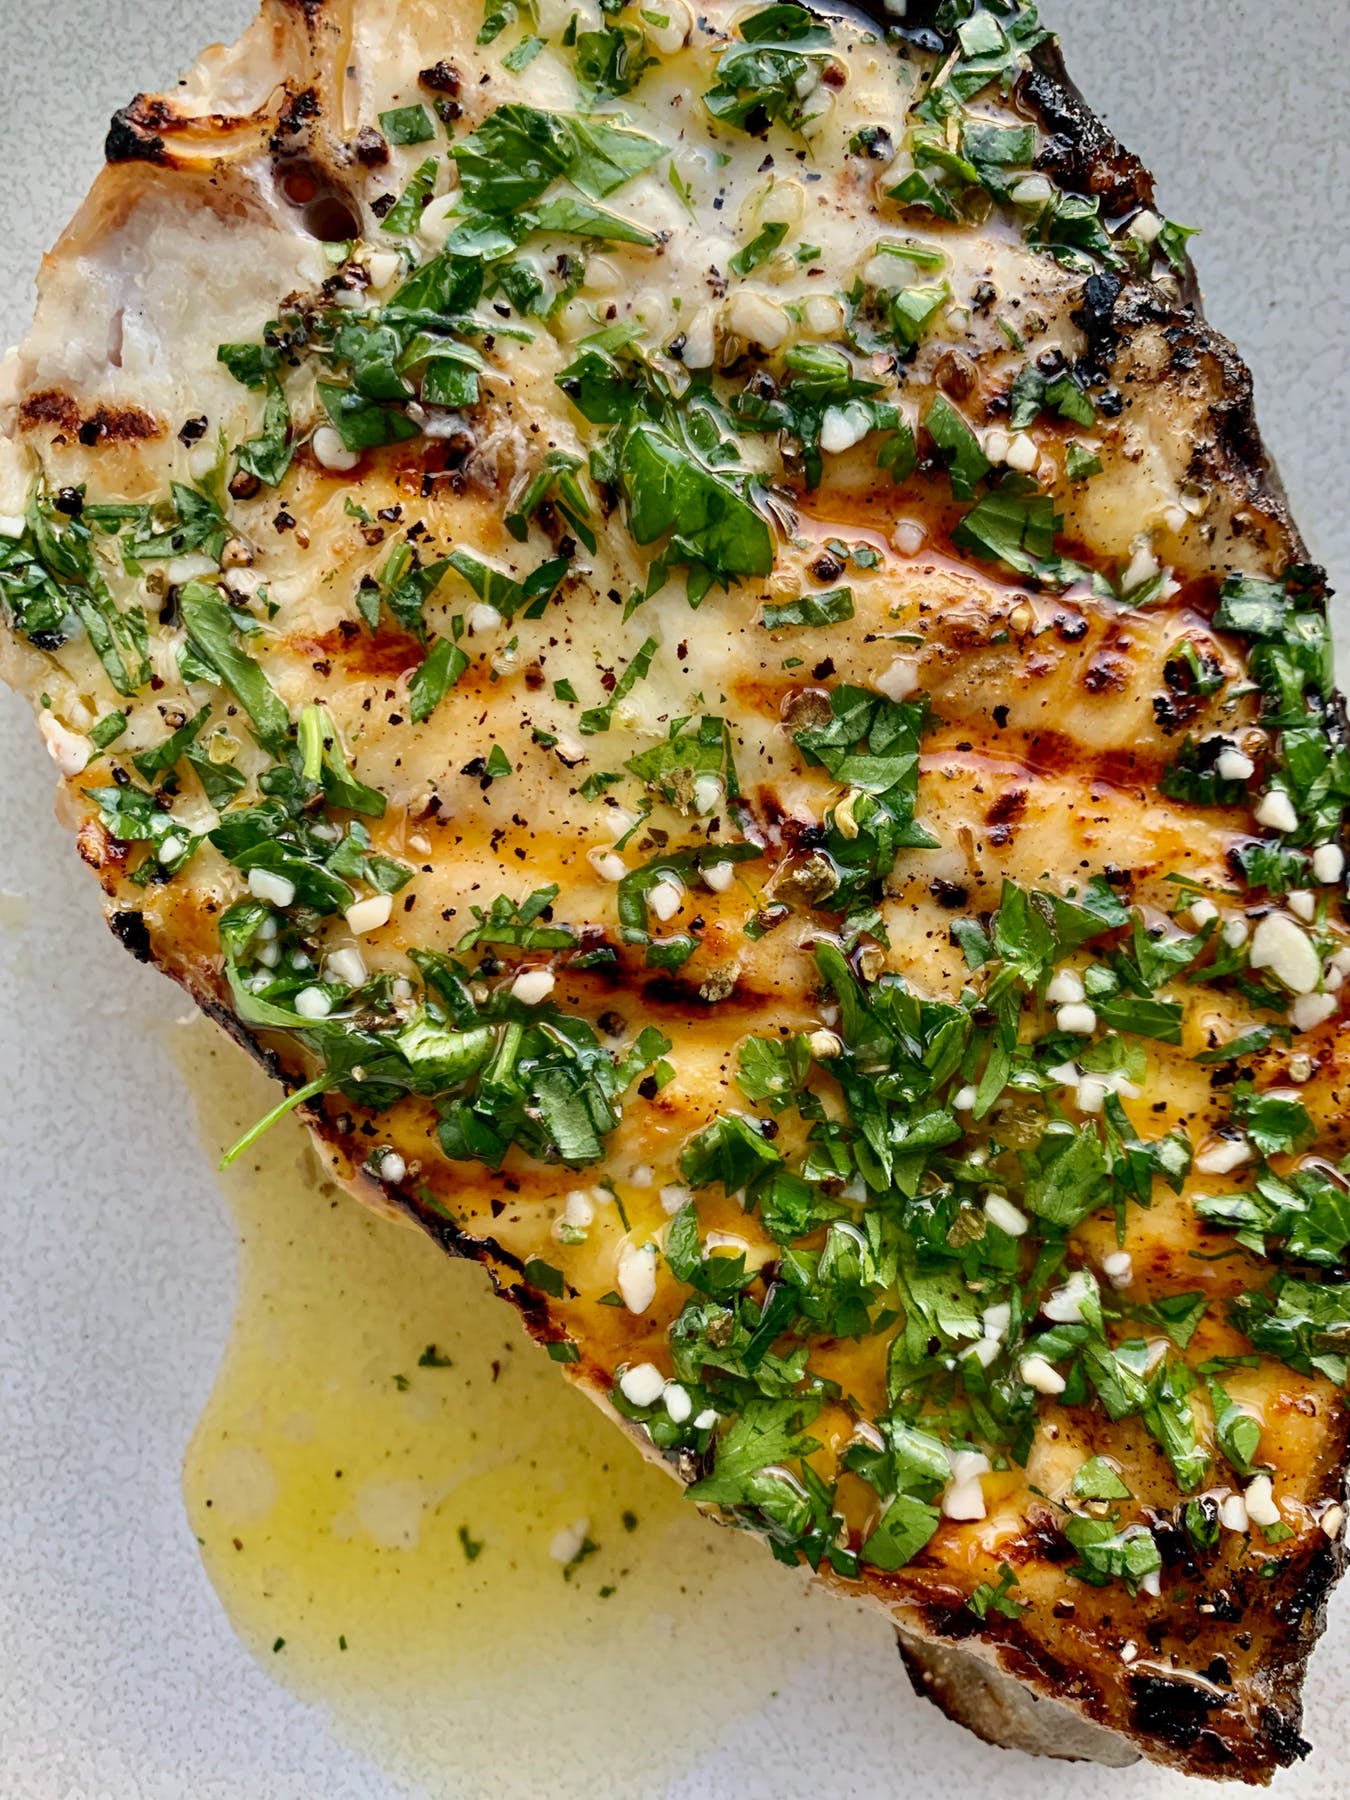 Grilled Halibut With Salmoriglio Sauce